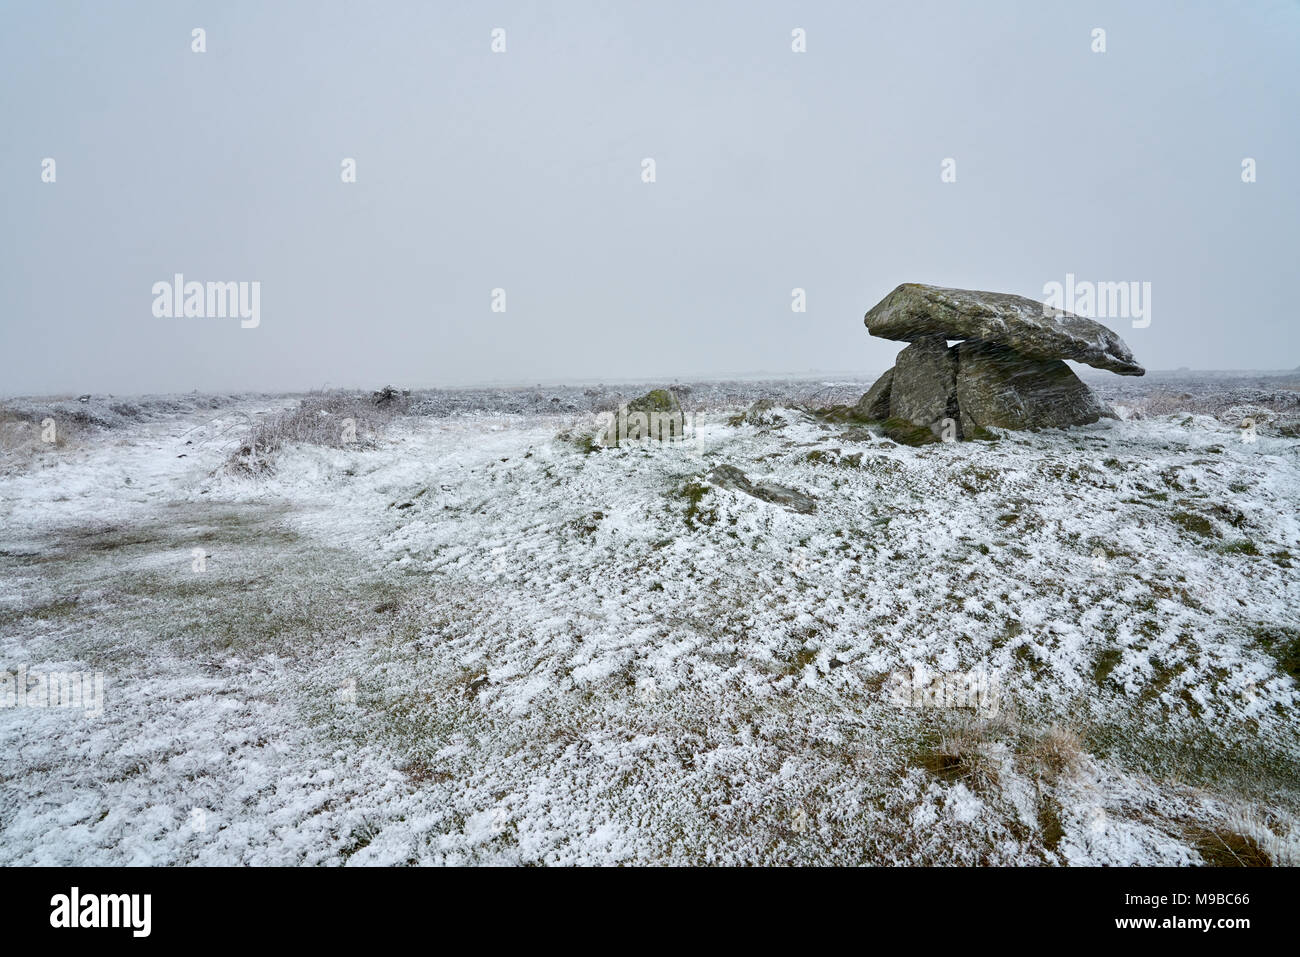 Chun Quoit 3000/4000 BC, Near St. Just, Penwith, West Cornwall UK. 18 March 2018 two weeks before Easter and one week before British summertime begins Stock Photo